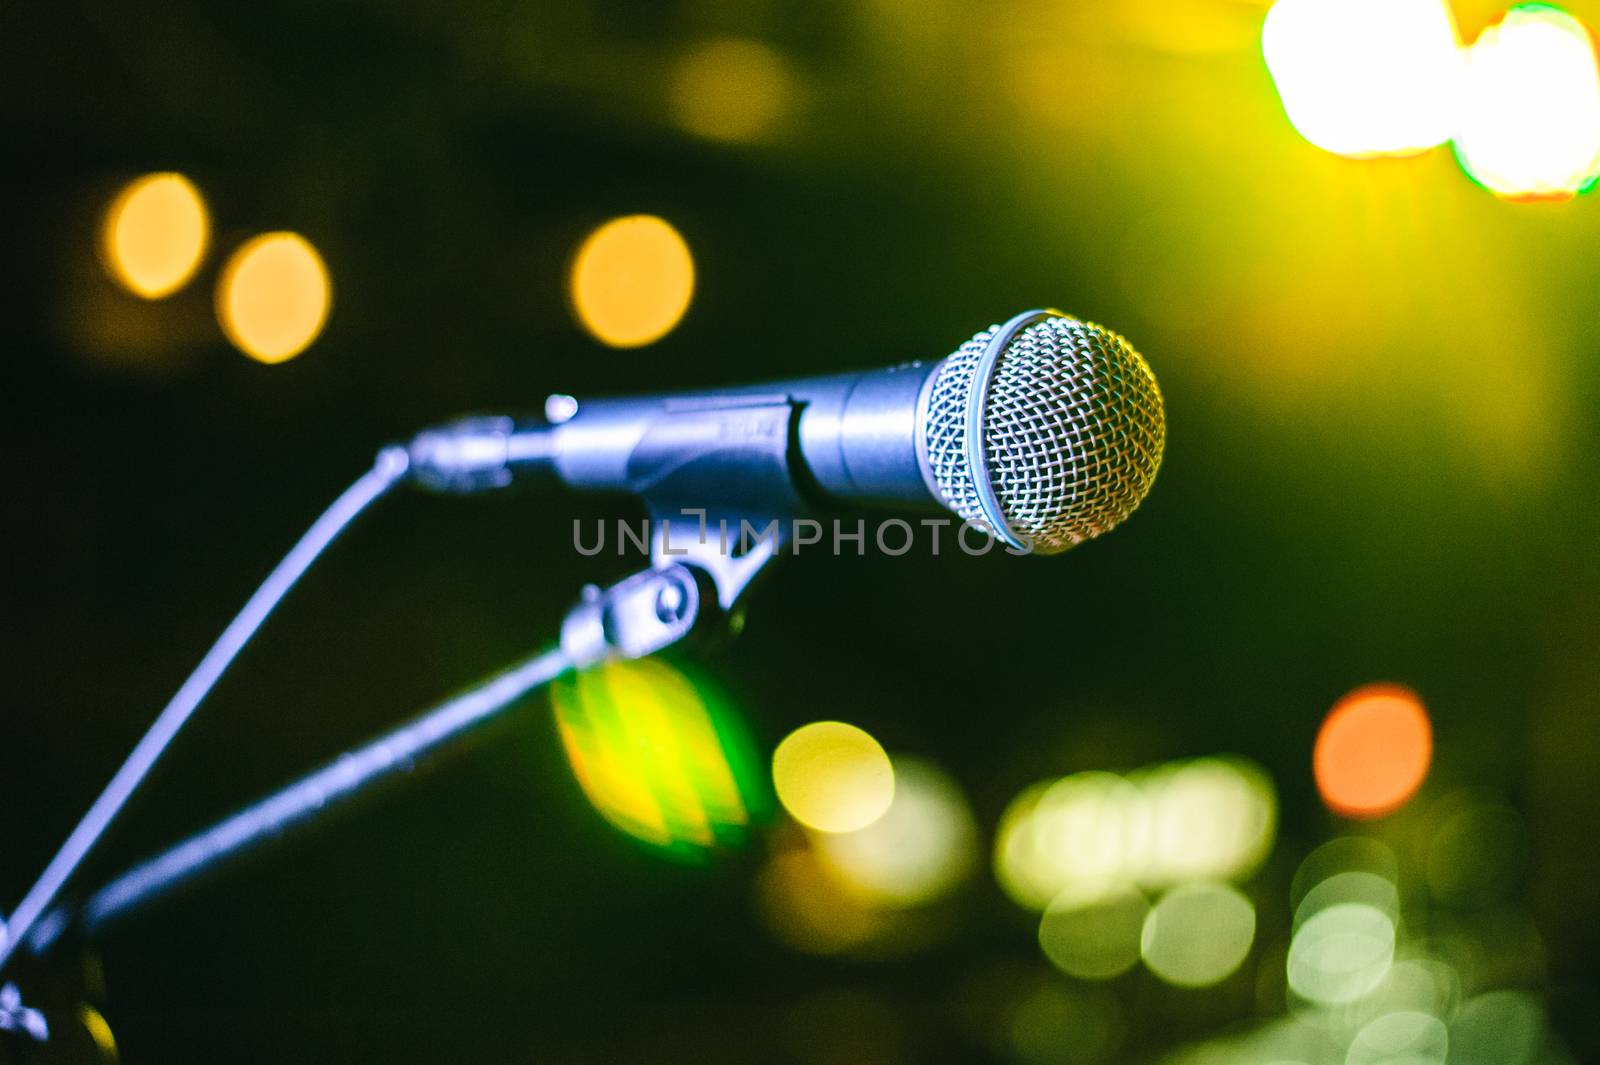 singer's vocal microphone stands on stage during a concert with multi-colored lights on the background